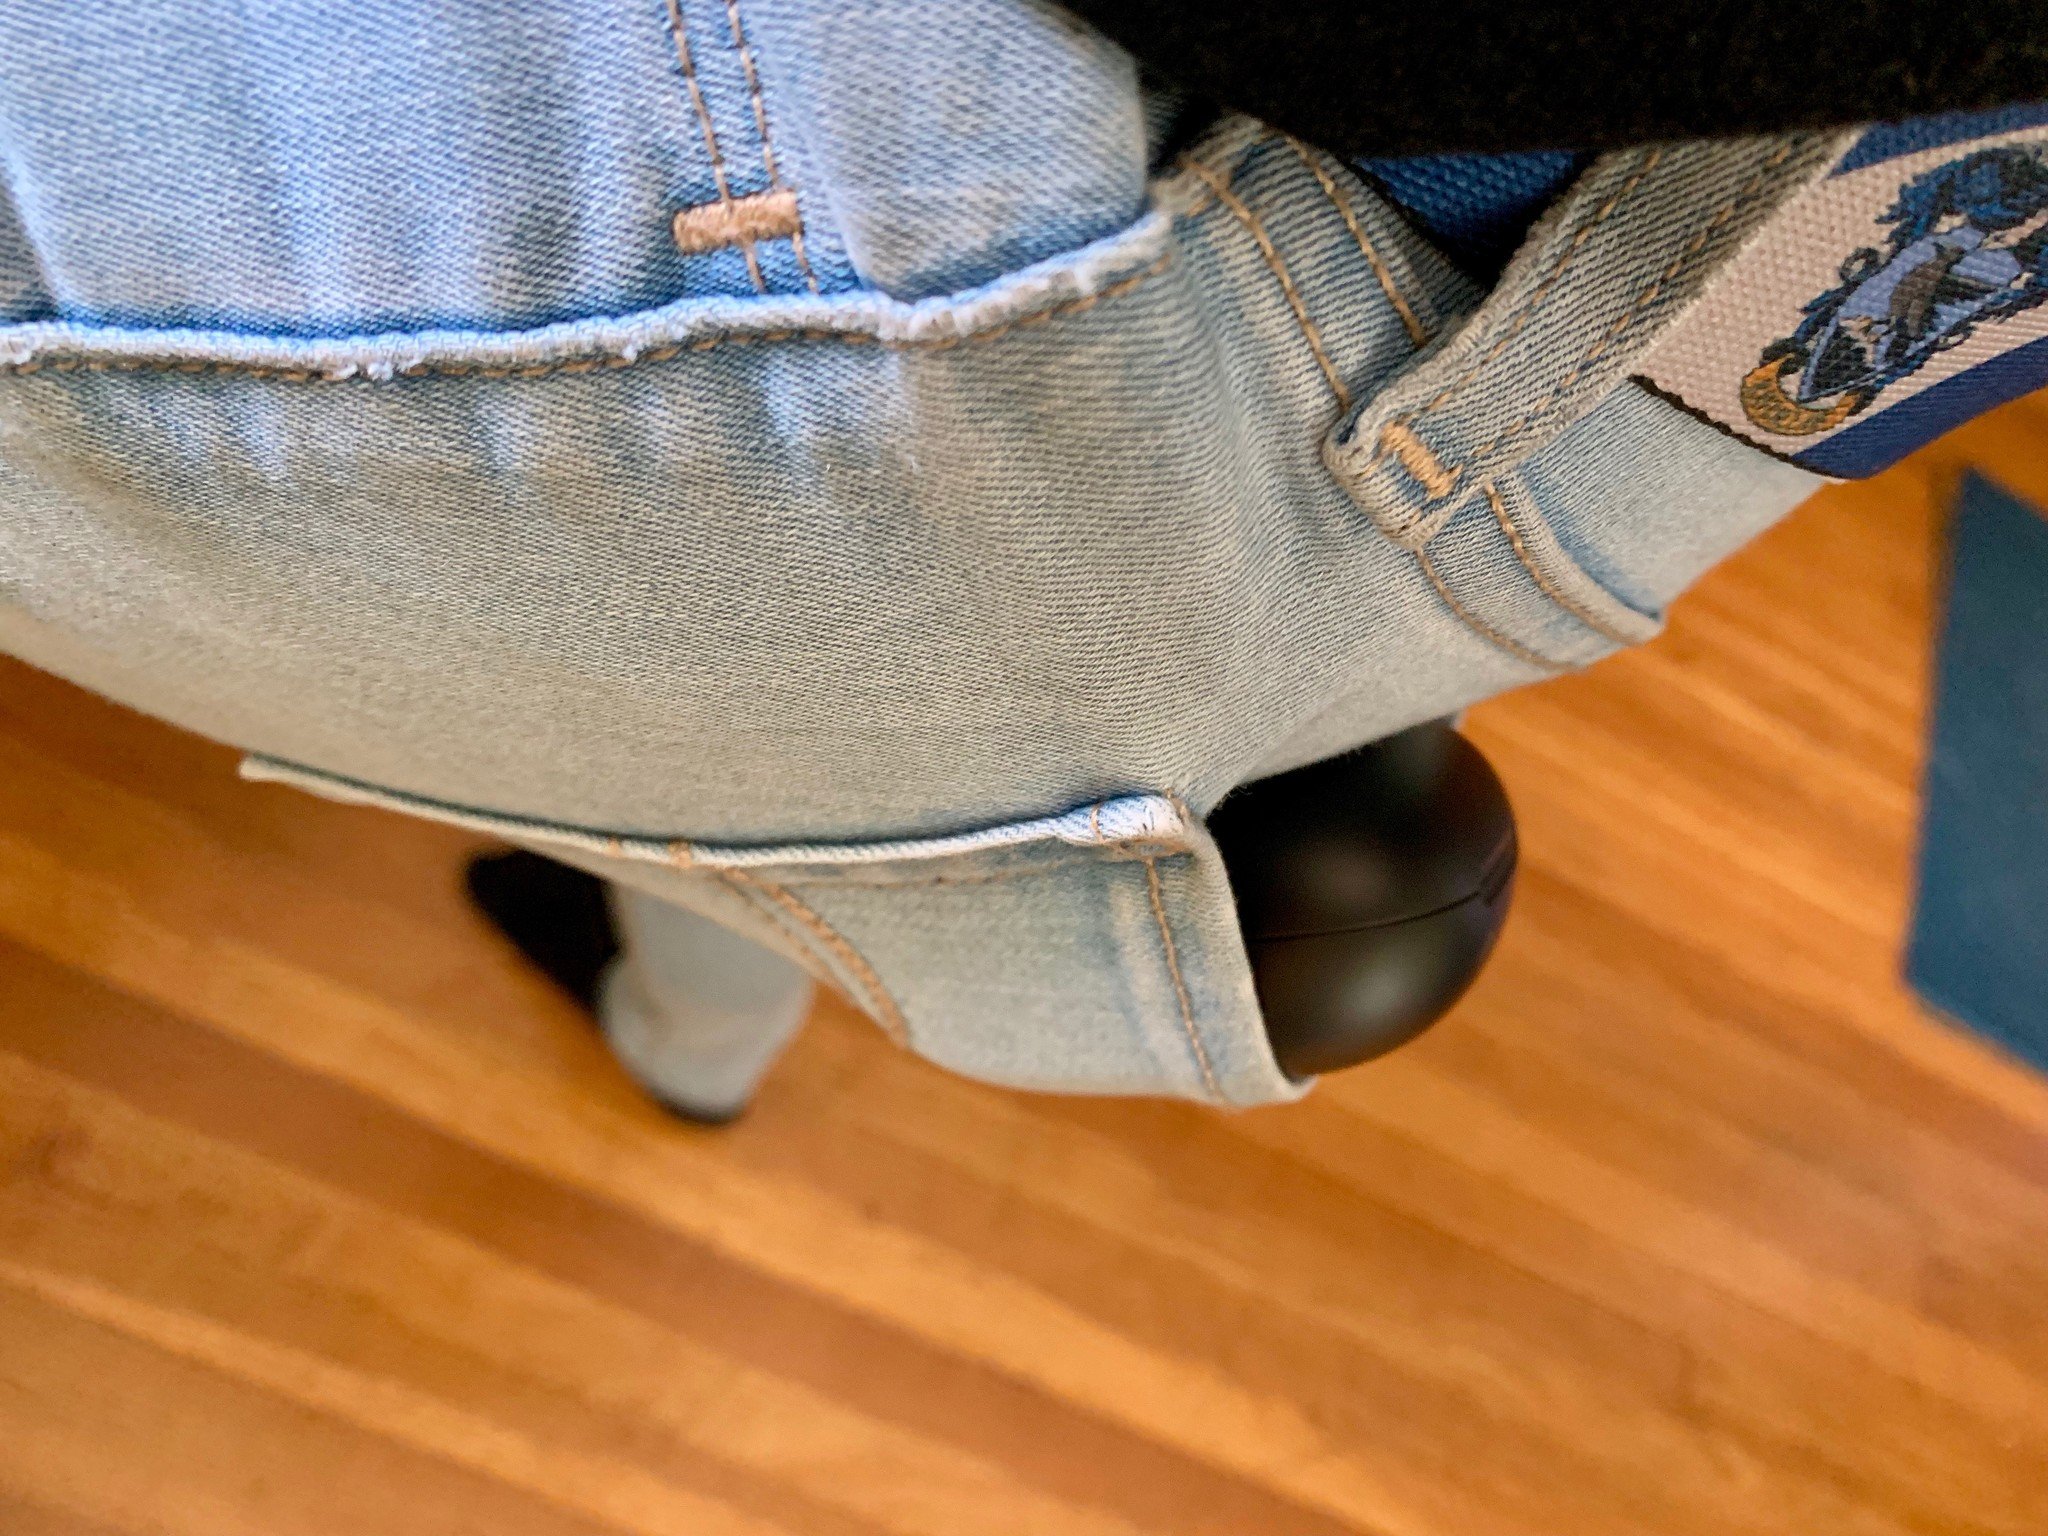 The Powerbeats Pro charging case is too big for skinny jeans